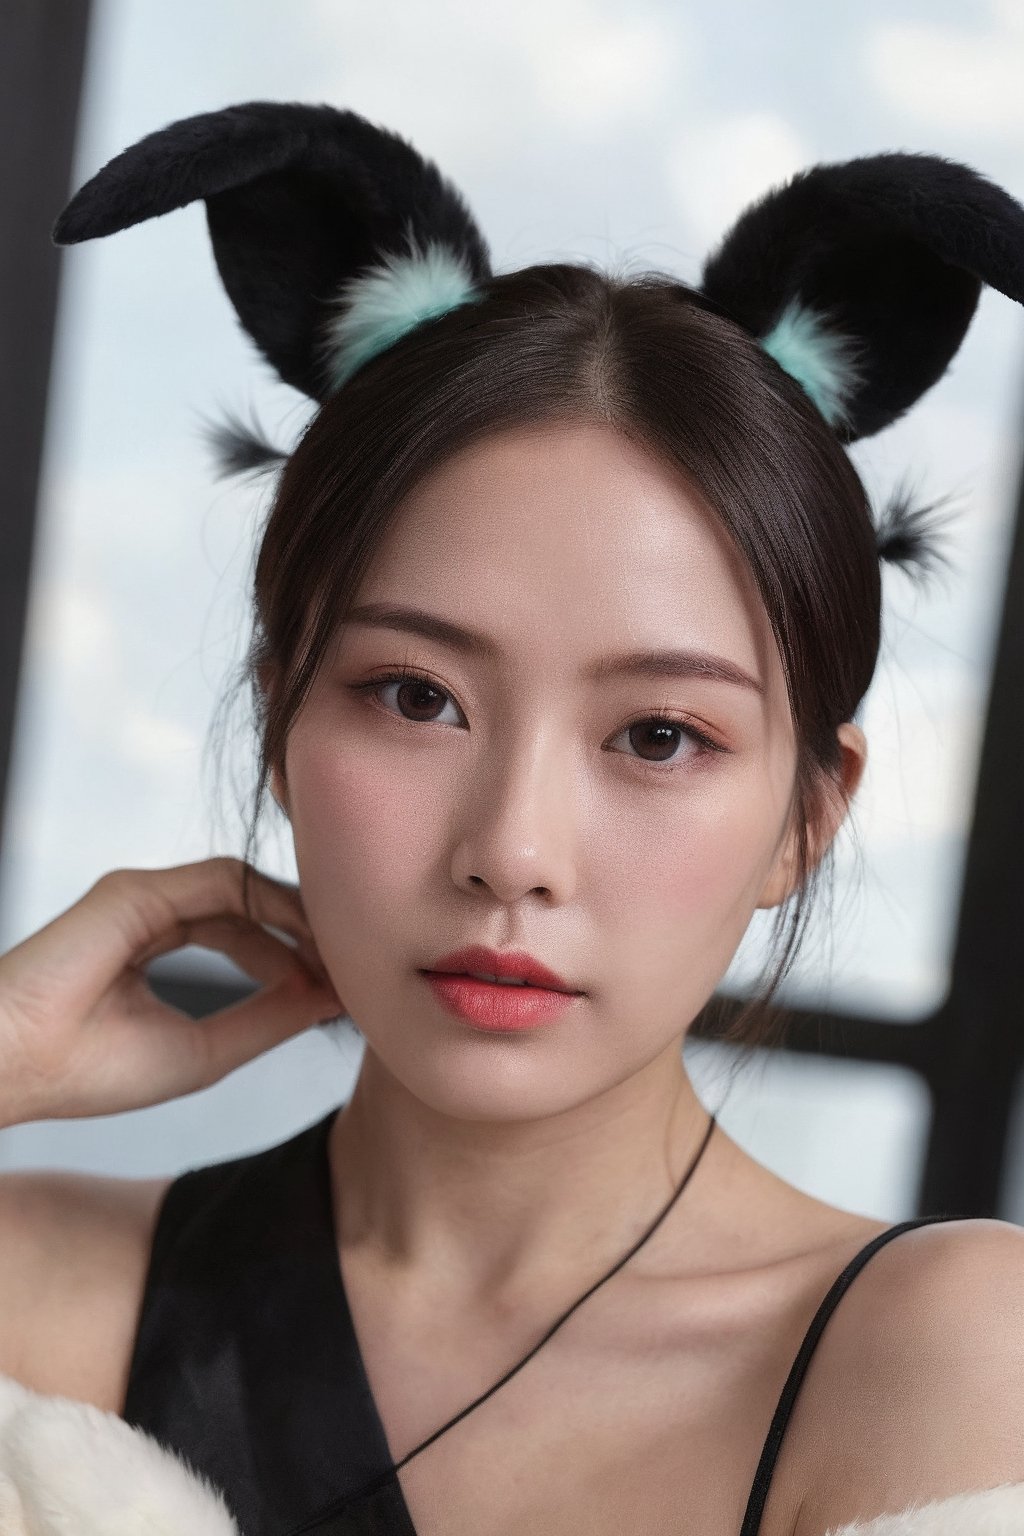 (ultra realistic,best quality),hubgwomen,masterpiece, 8k, hq, 1 girl,photorealistic,Extremely Realistic, in depth, cinematic light,hubggirl, red eyes, black hair, hair bun with accessories, traditional East Asian attire, rabbit ears headpiece, black and teal clothing, cloud pattern on garment, mystical, two black rabbits, one on shoulder and one in foreground, pale skin, blush on cheeks, serious expression, white background, portrait, upper body shot, artful composition, detailed line art, vibrant color contrast., ,HUBGGIRL